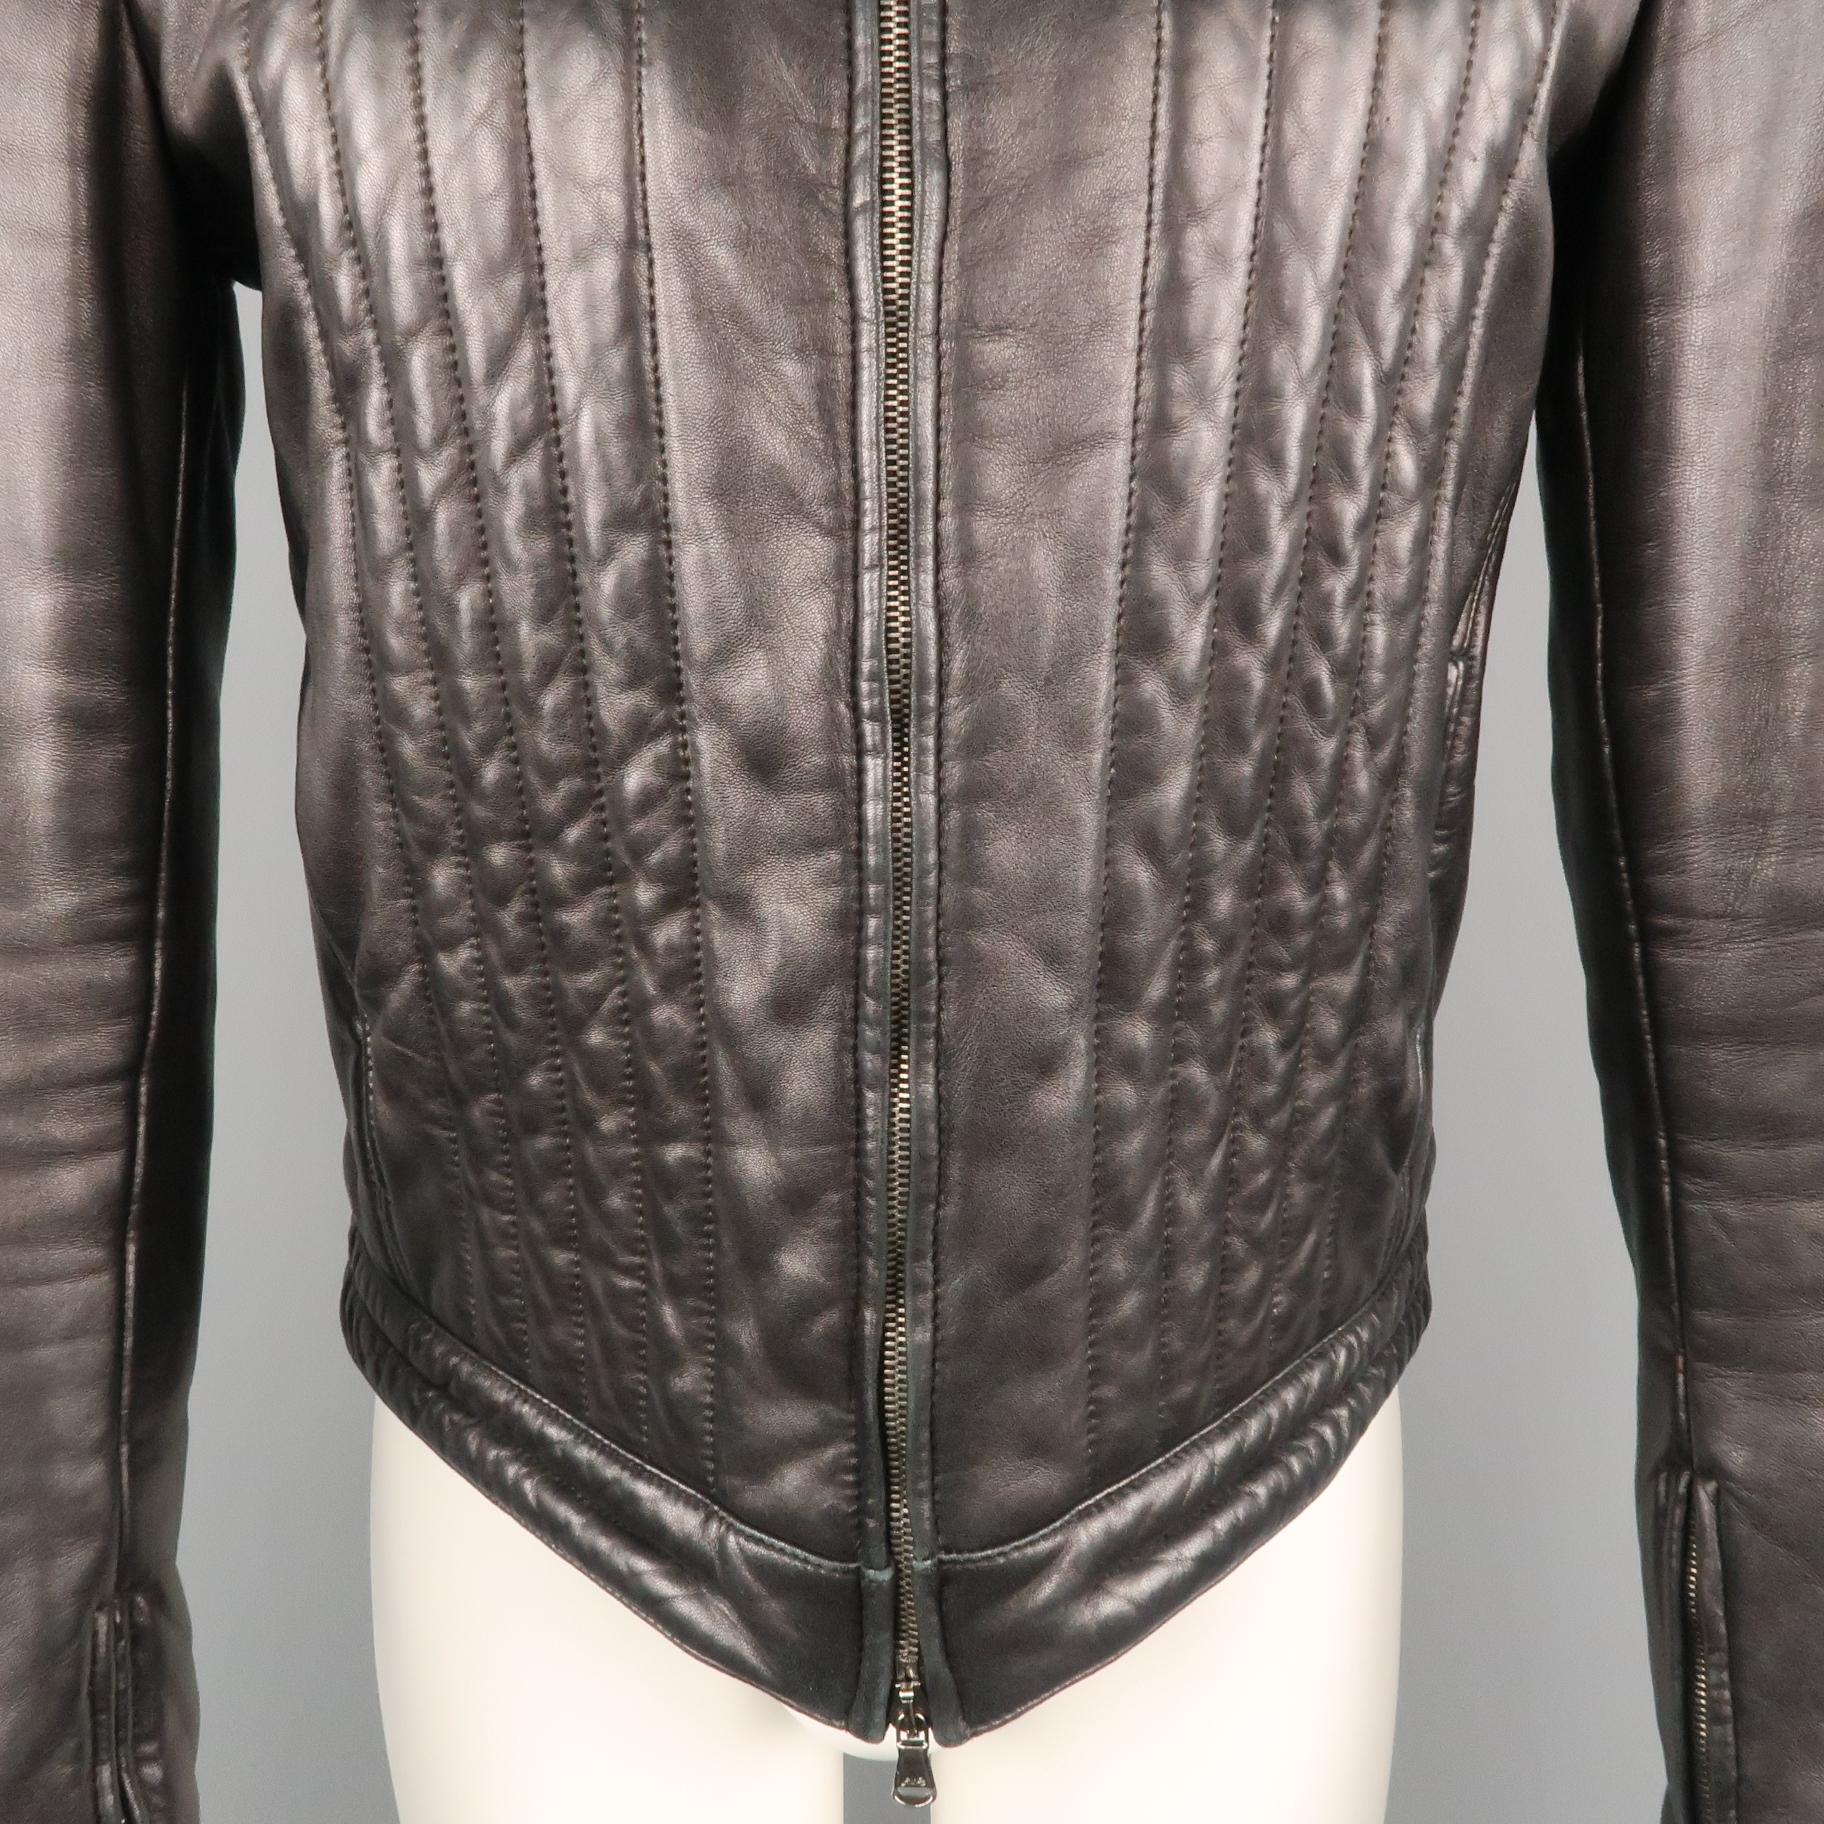 tom ford gucci leather jacket